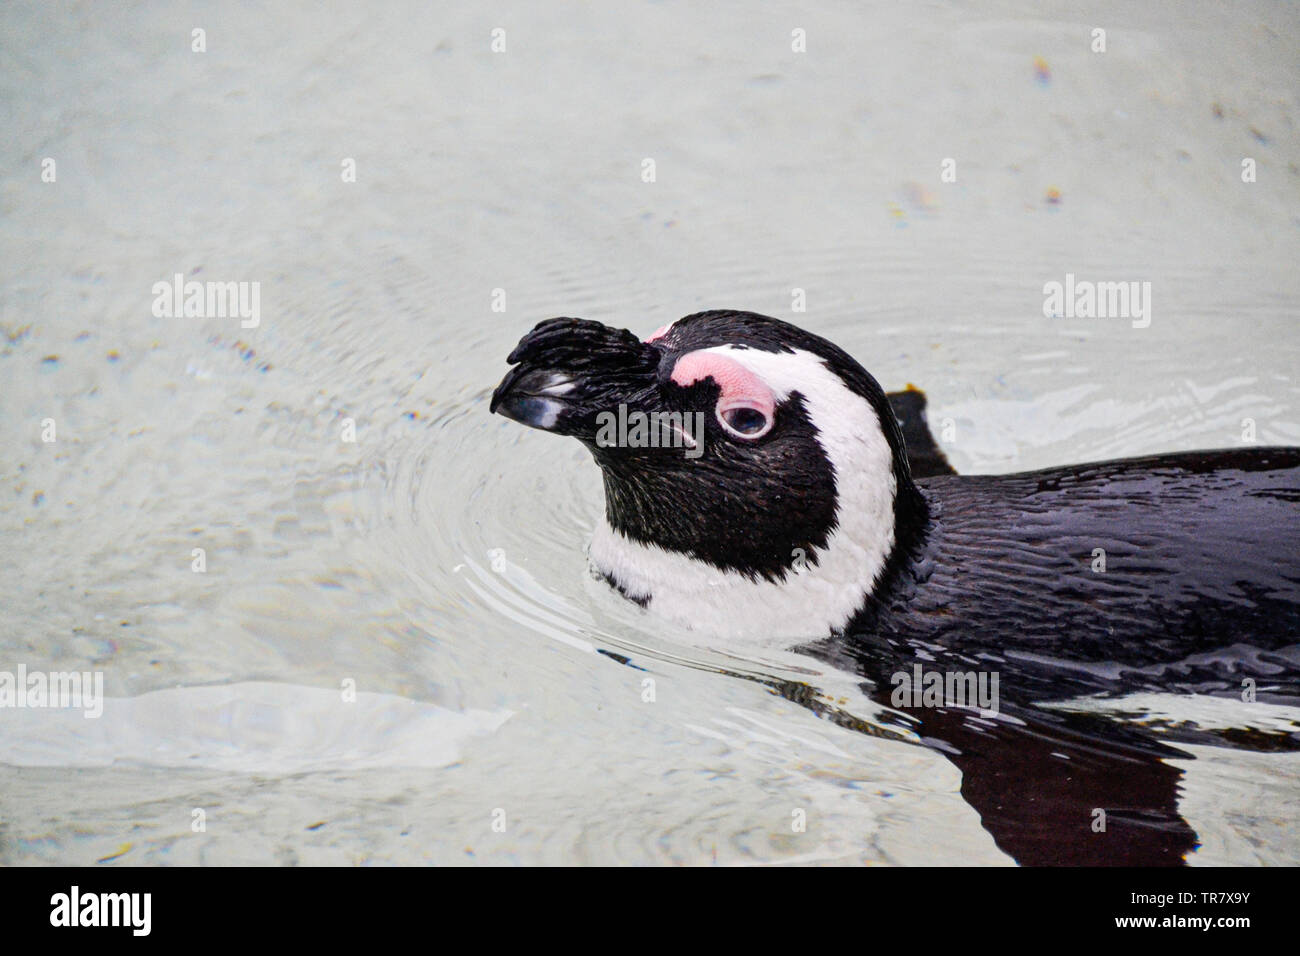 The Foto from the penguin was taken in the Ozenarium in Lisbon (Portugal). It is one of the largest aquariums in Europe. Stock Photo